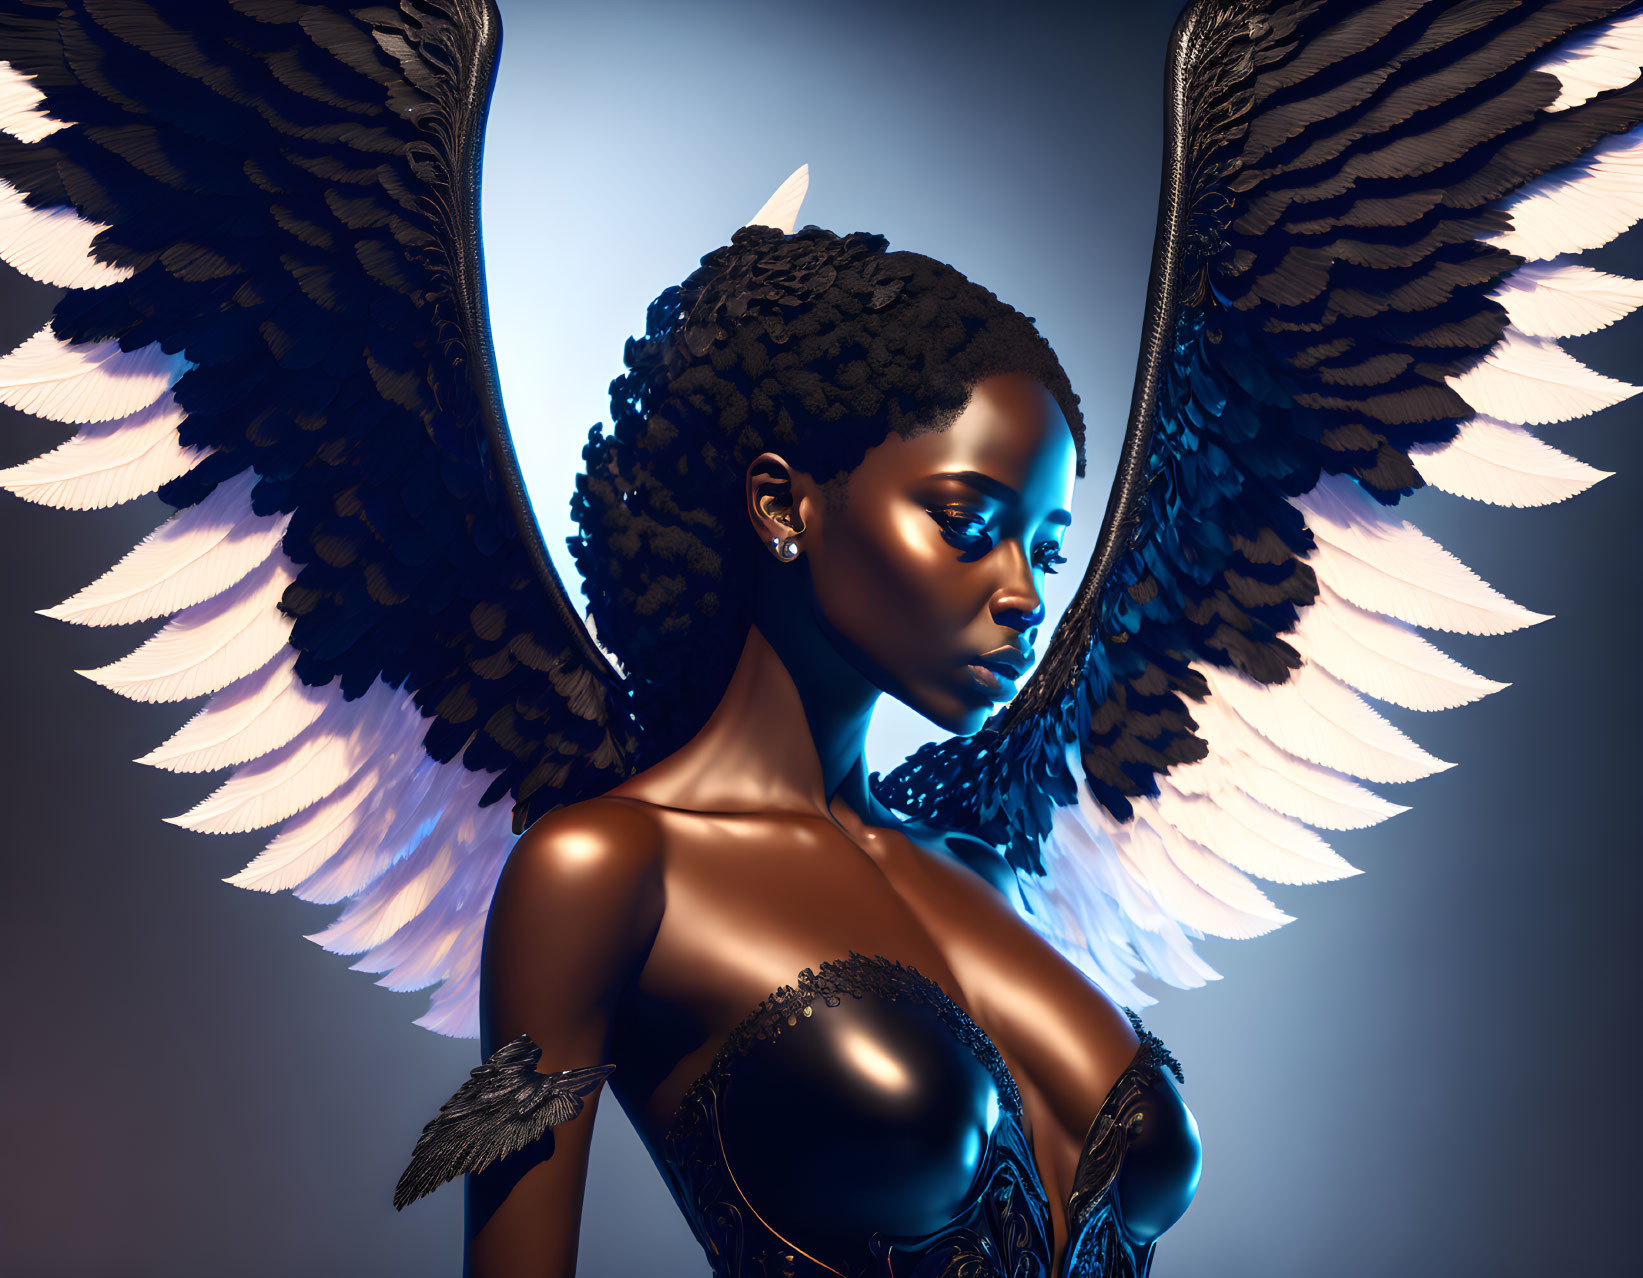 Digital artwork featuring a woman with dark skin, wearing a black corset and striking black and white wings